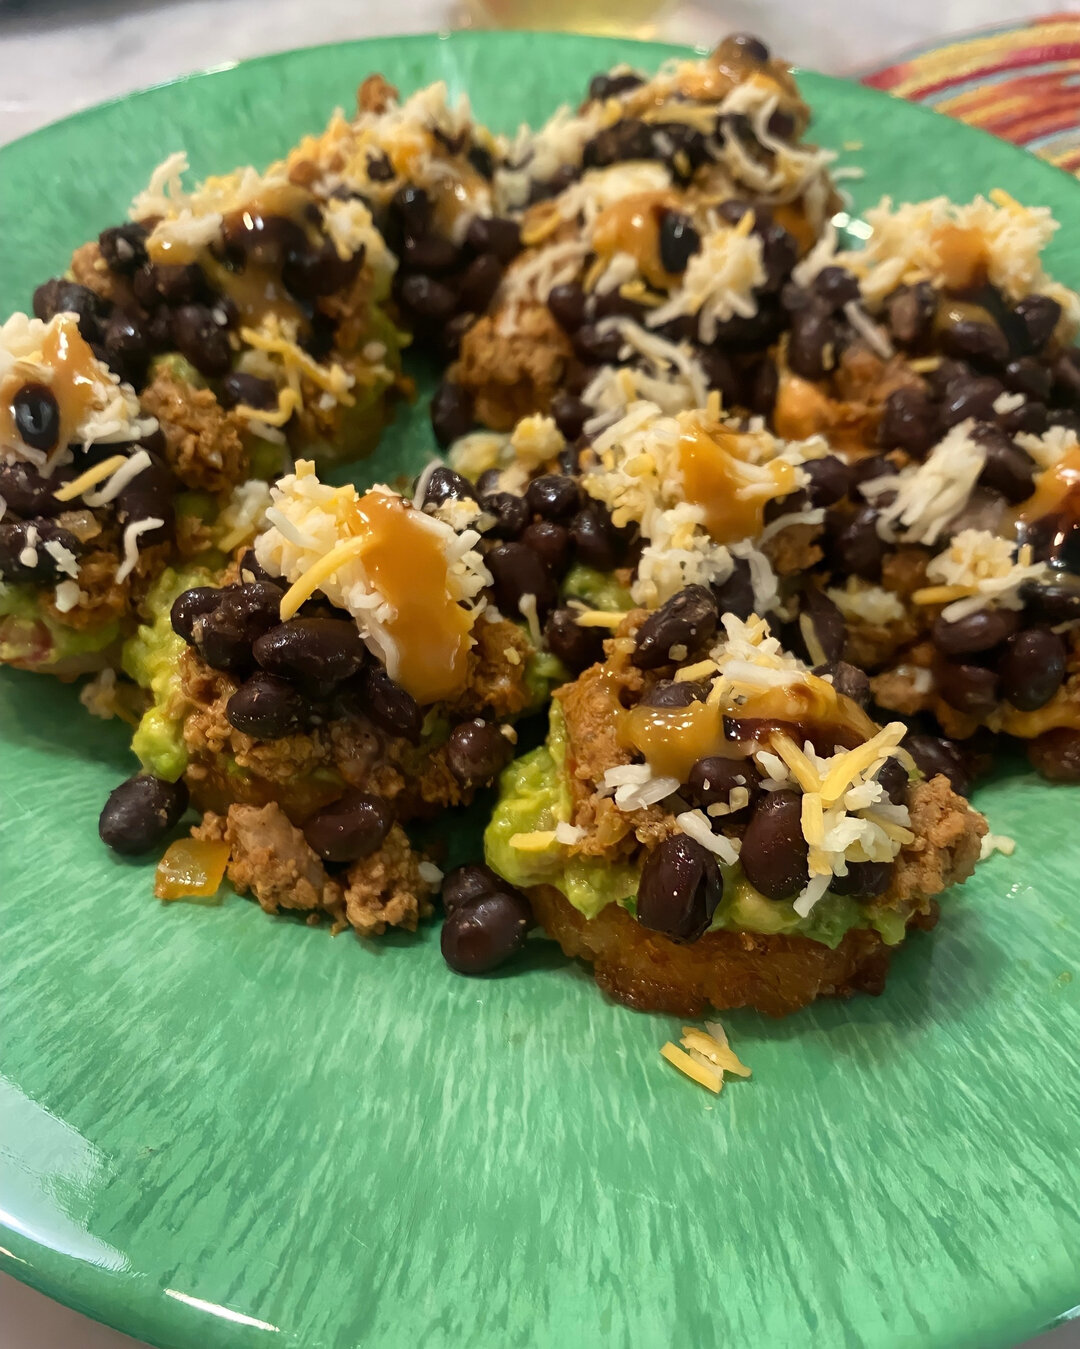 Here's another cool recipe from @prissss615! A delicious looking TexMex/Rice Brown twist. 🌮🔥​​​​​​​​
.​​​​​​​​
.​​​​​​​​
Shop now @bristolfarms @wholefoods @instacart @gelsonsmarkets 🛒​​​​​​​​
.​​​​​​​​
.​​​​​​​​
#recipe #recipes #good #yummy #fre